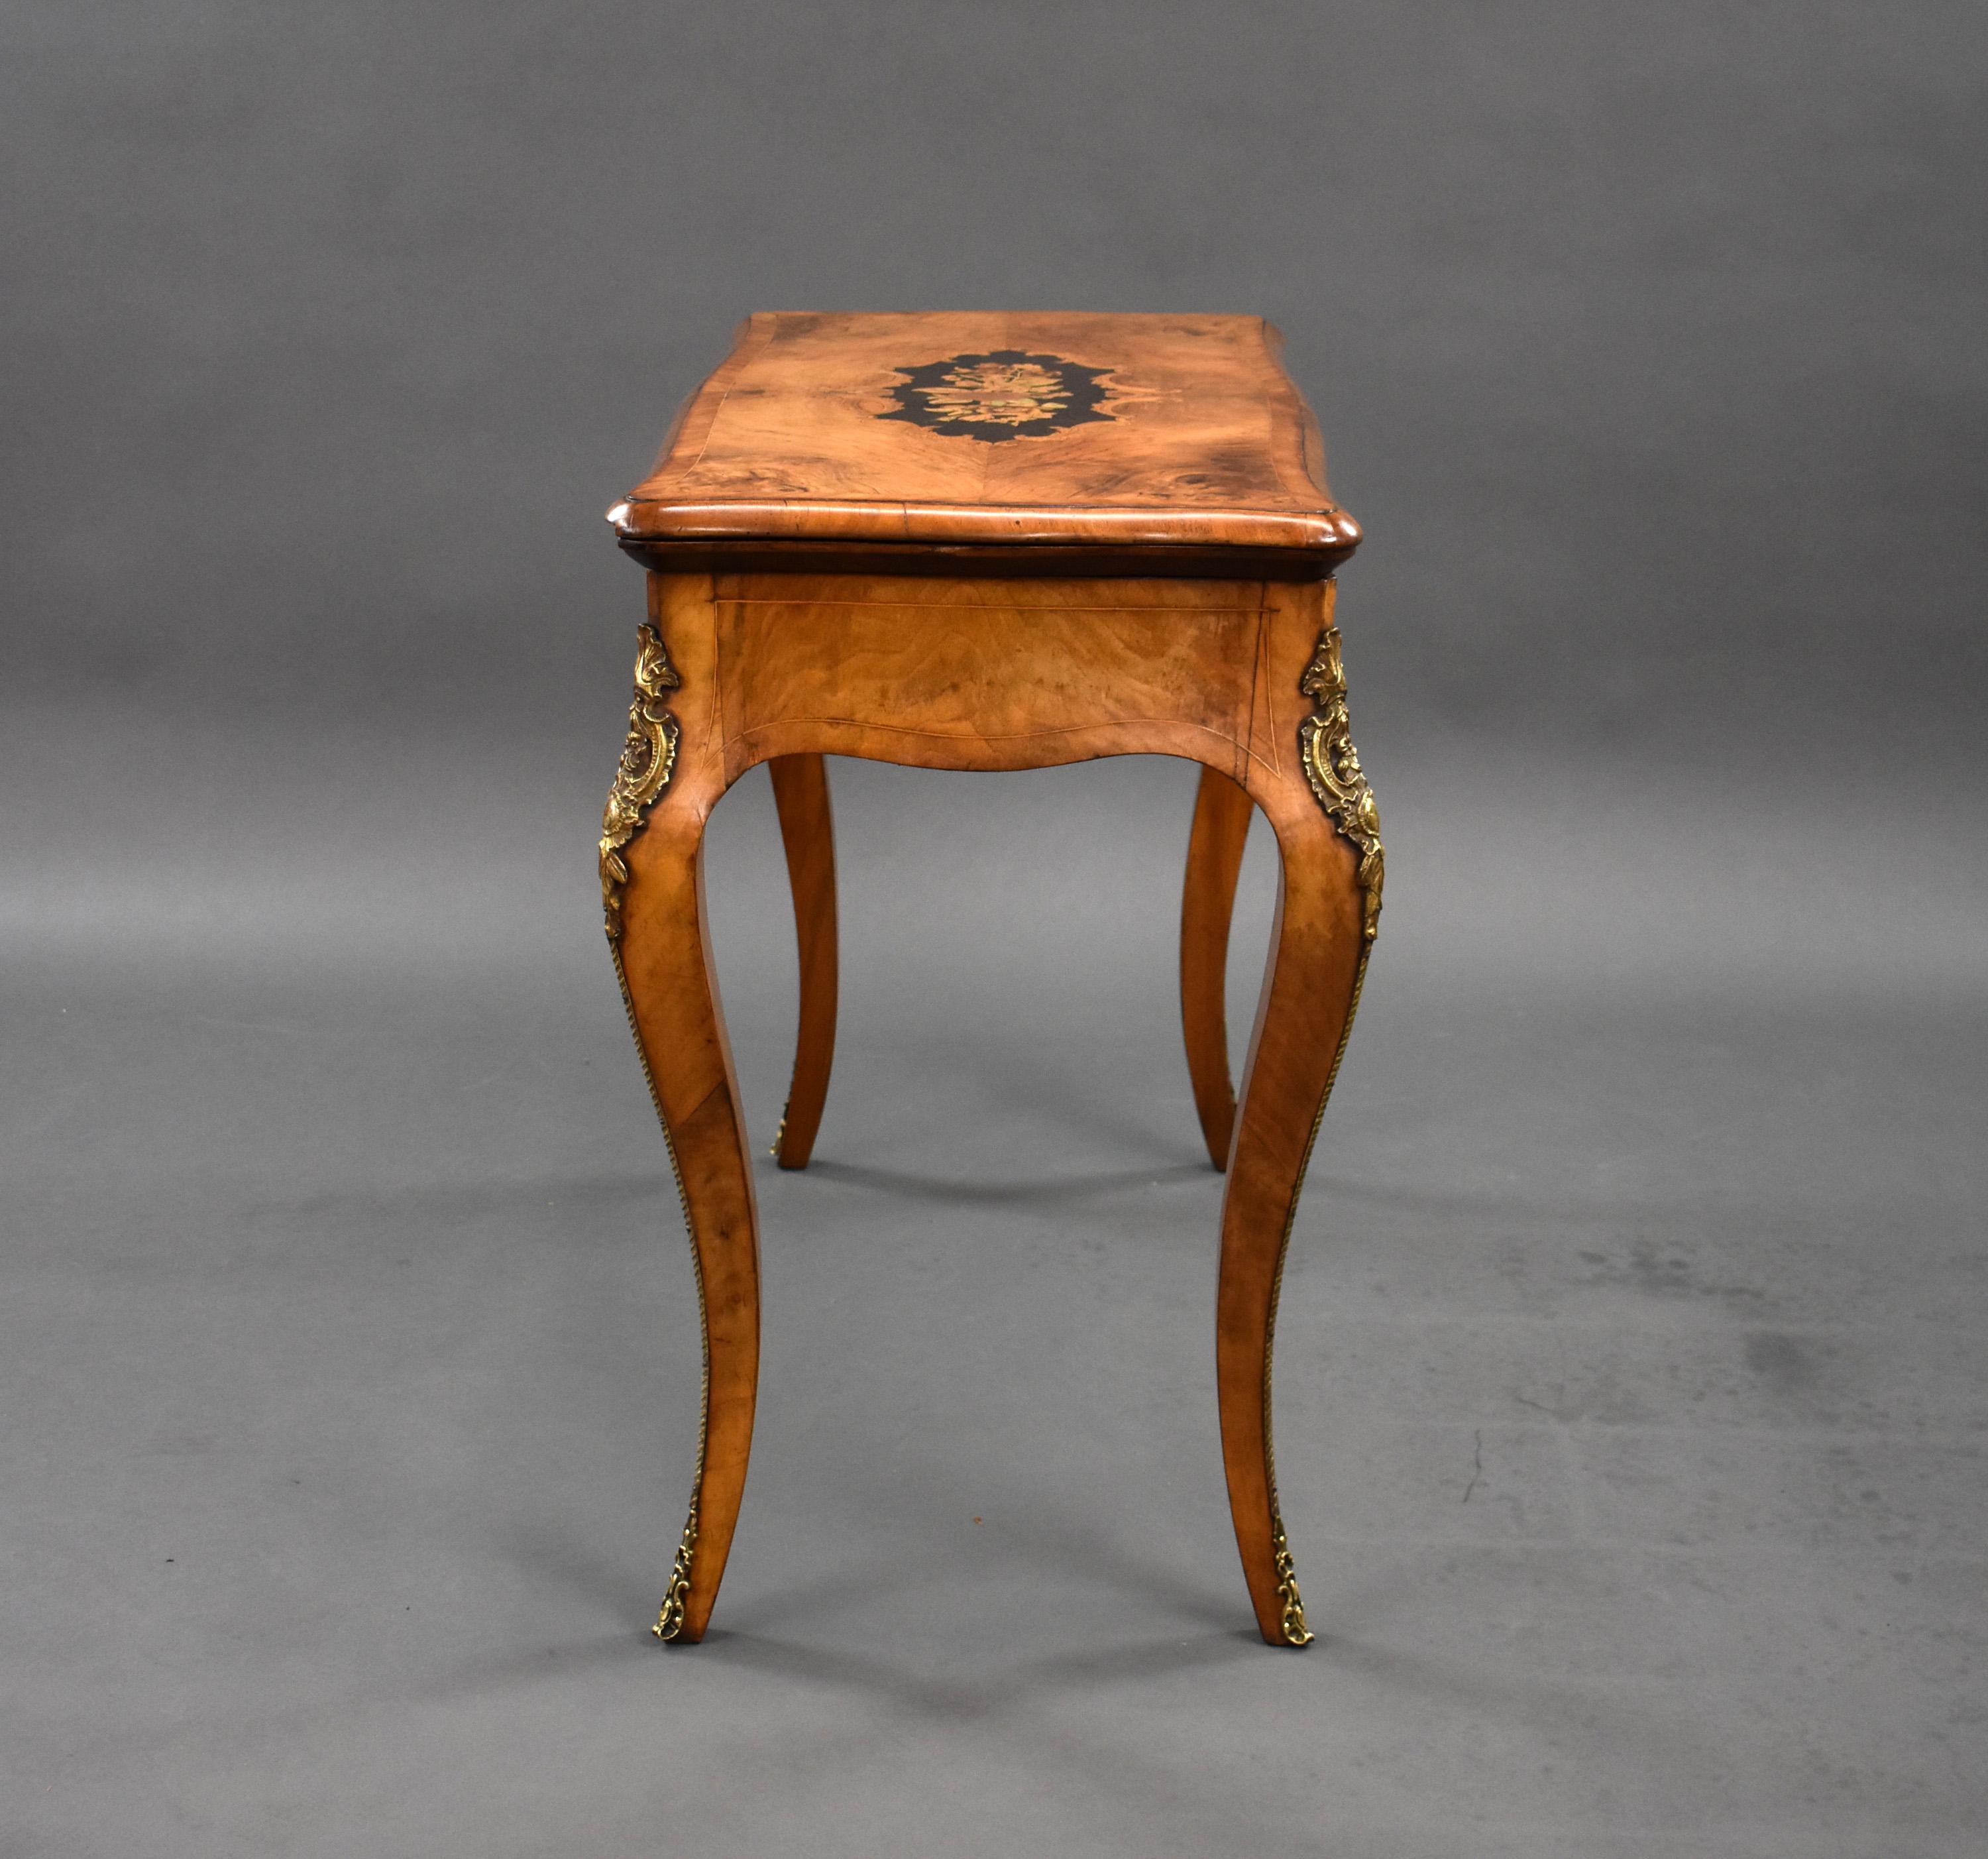 19th Century English Victorian Burl Walnut and Marquetry Inlaid Card Table For Sale 1